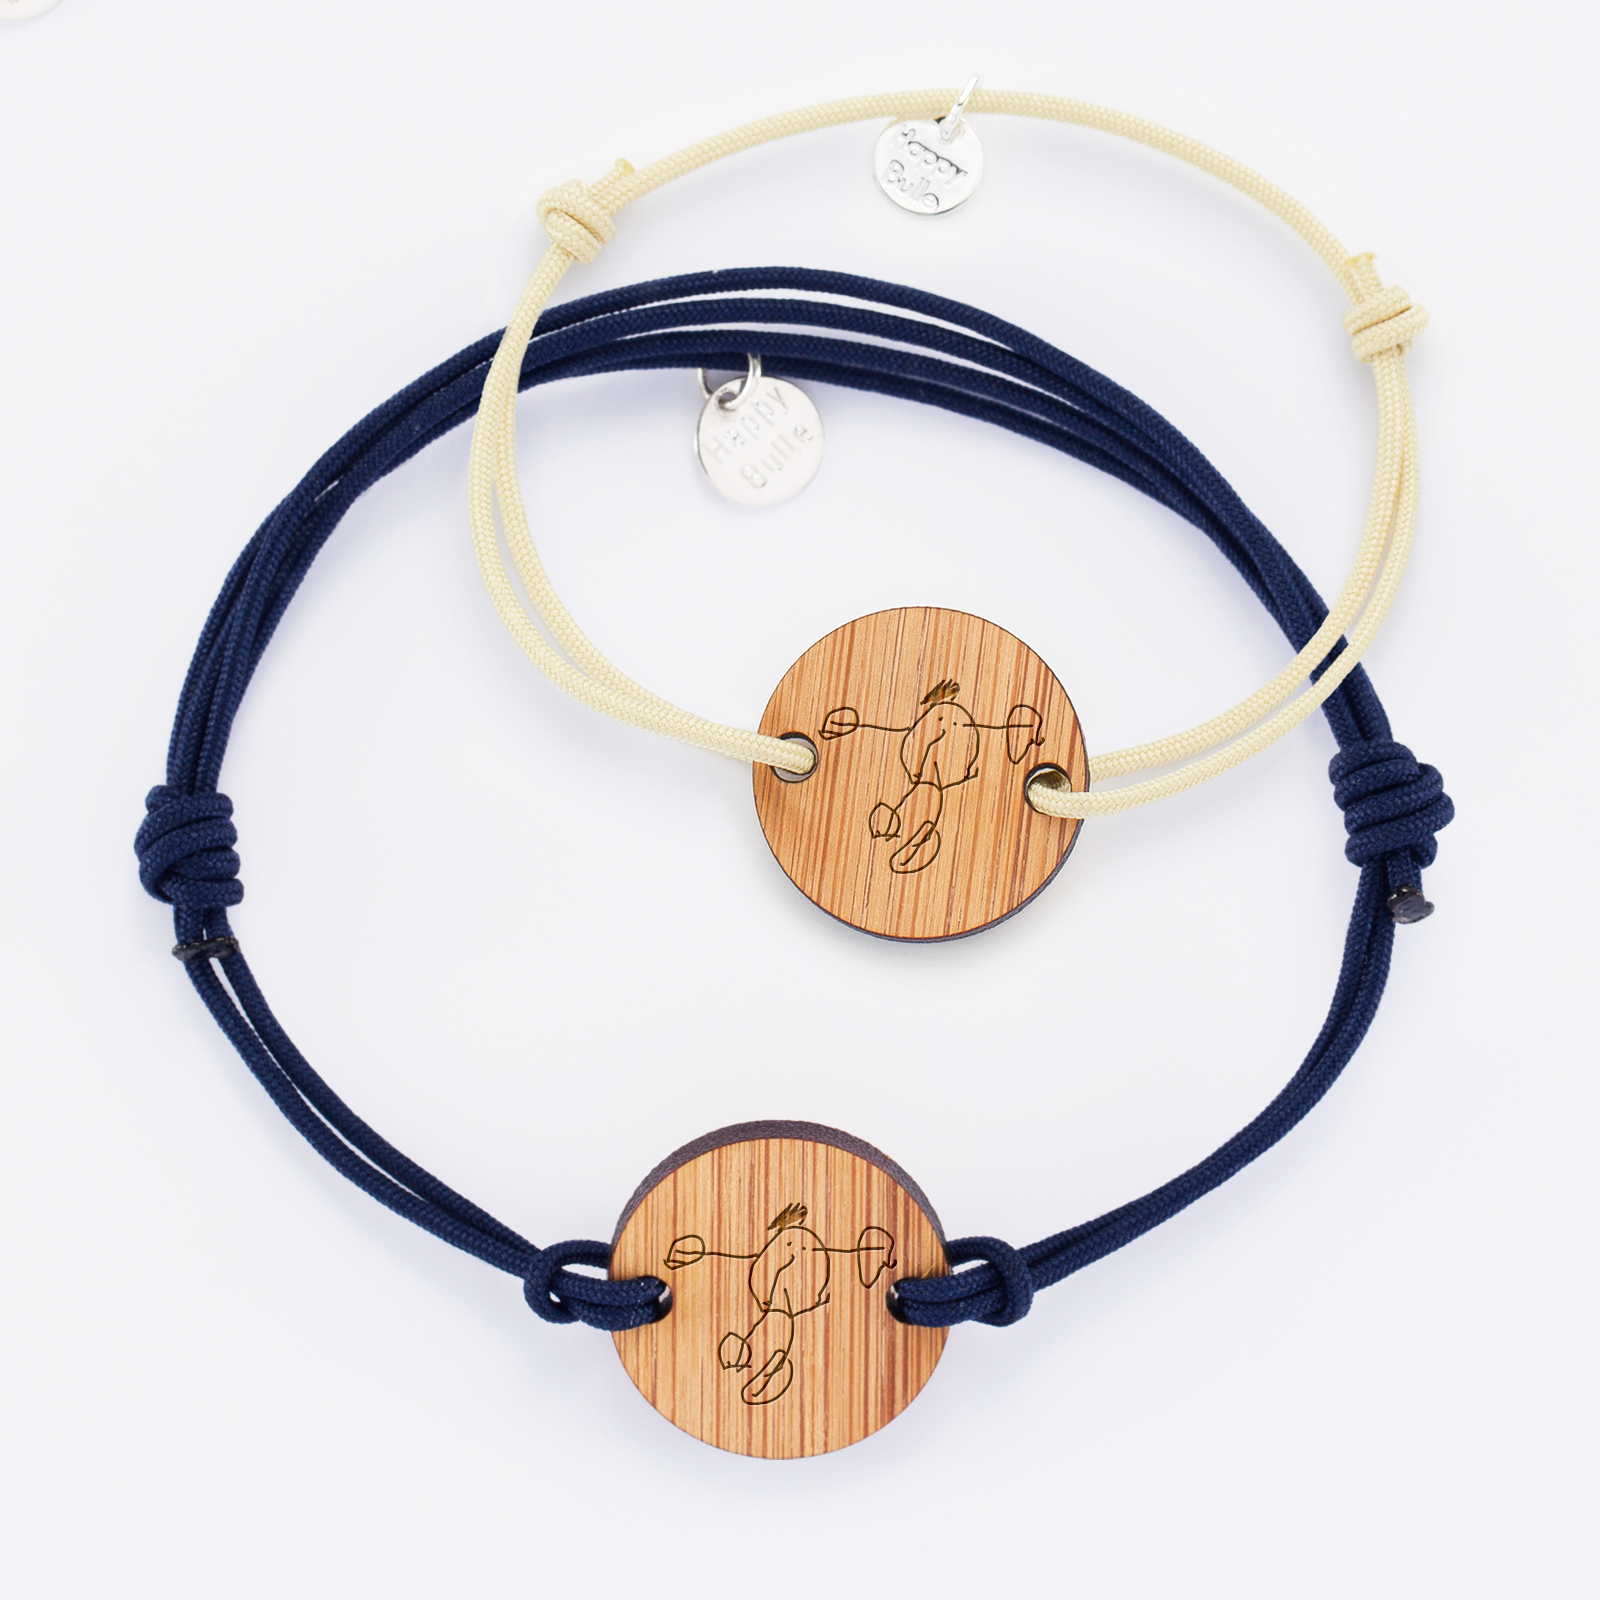 Pair of personalised bracelets with engraved 2-hole round wooden medallions 21mm sketches